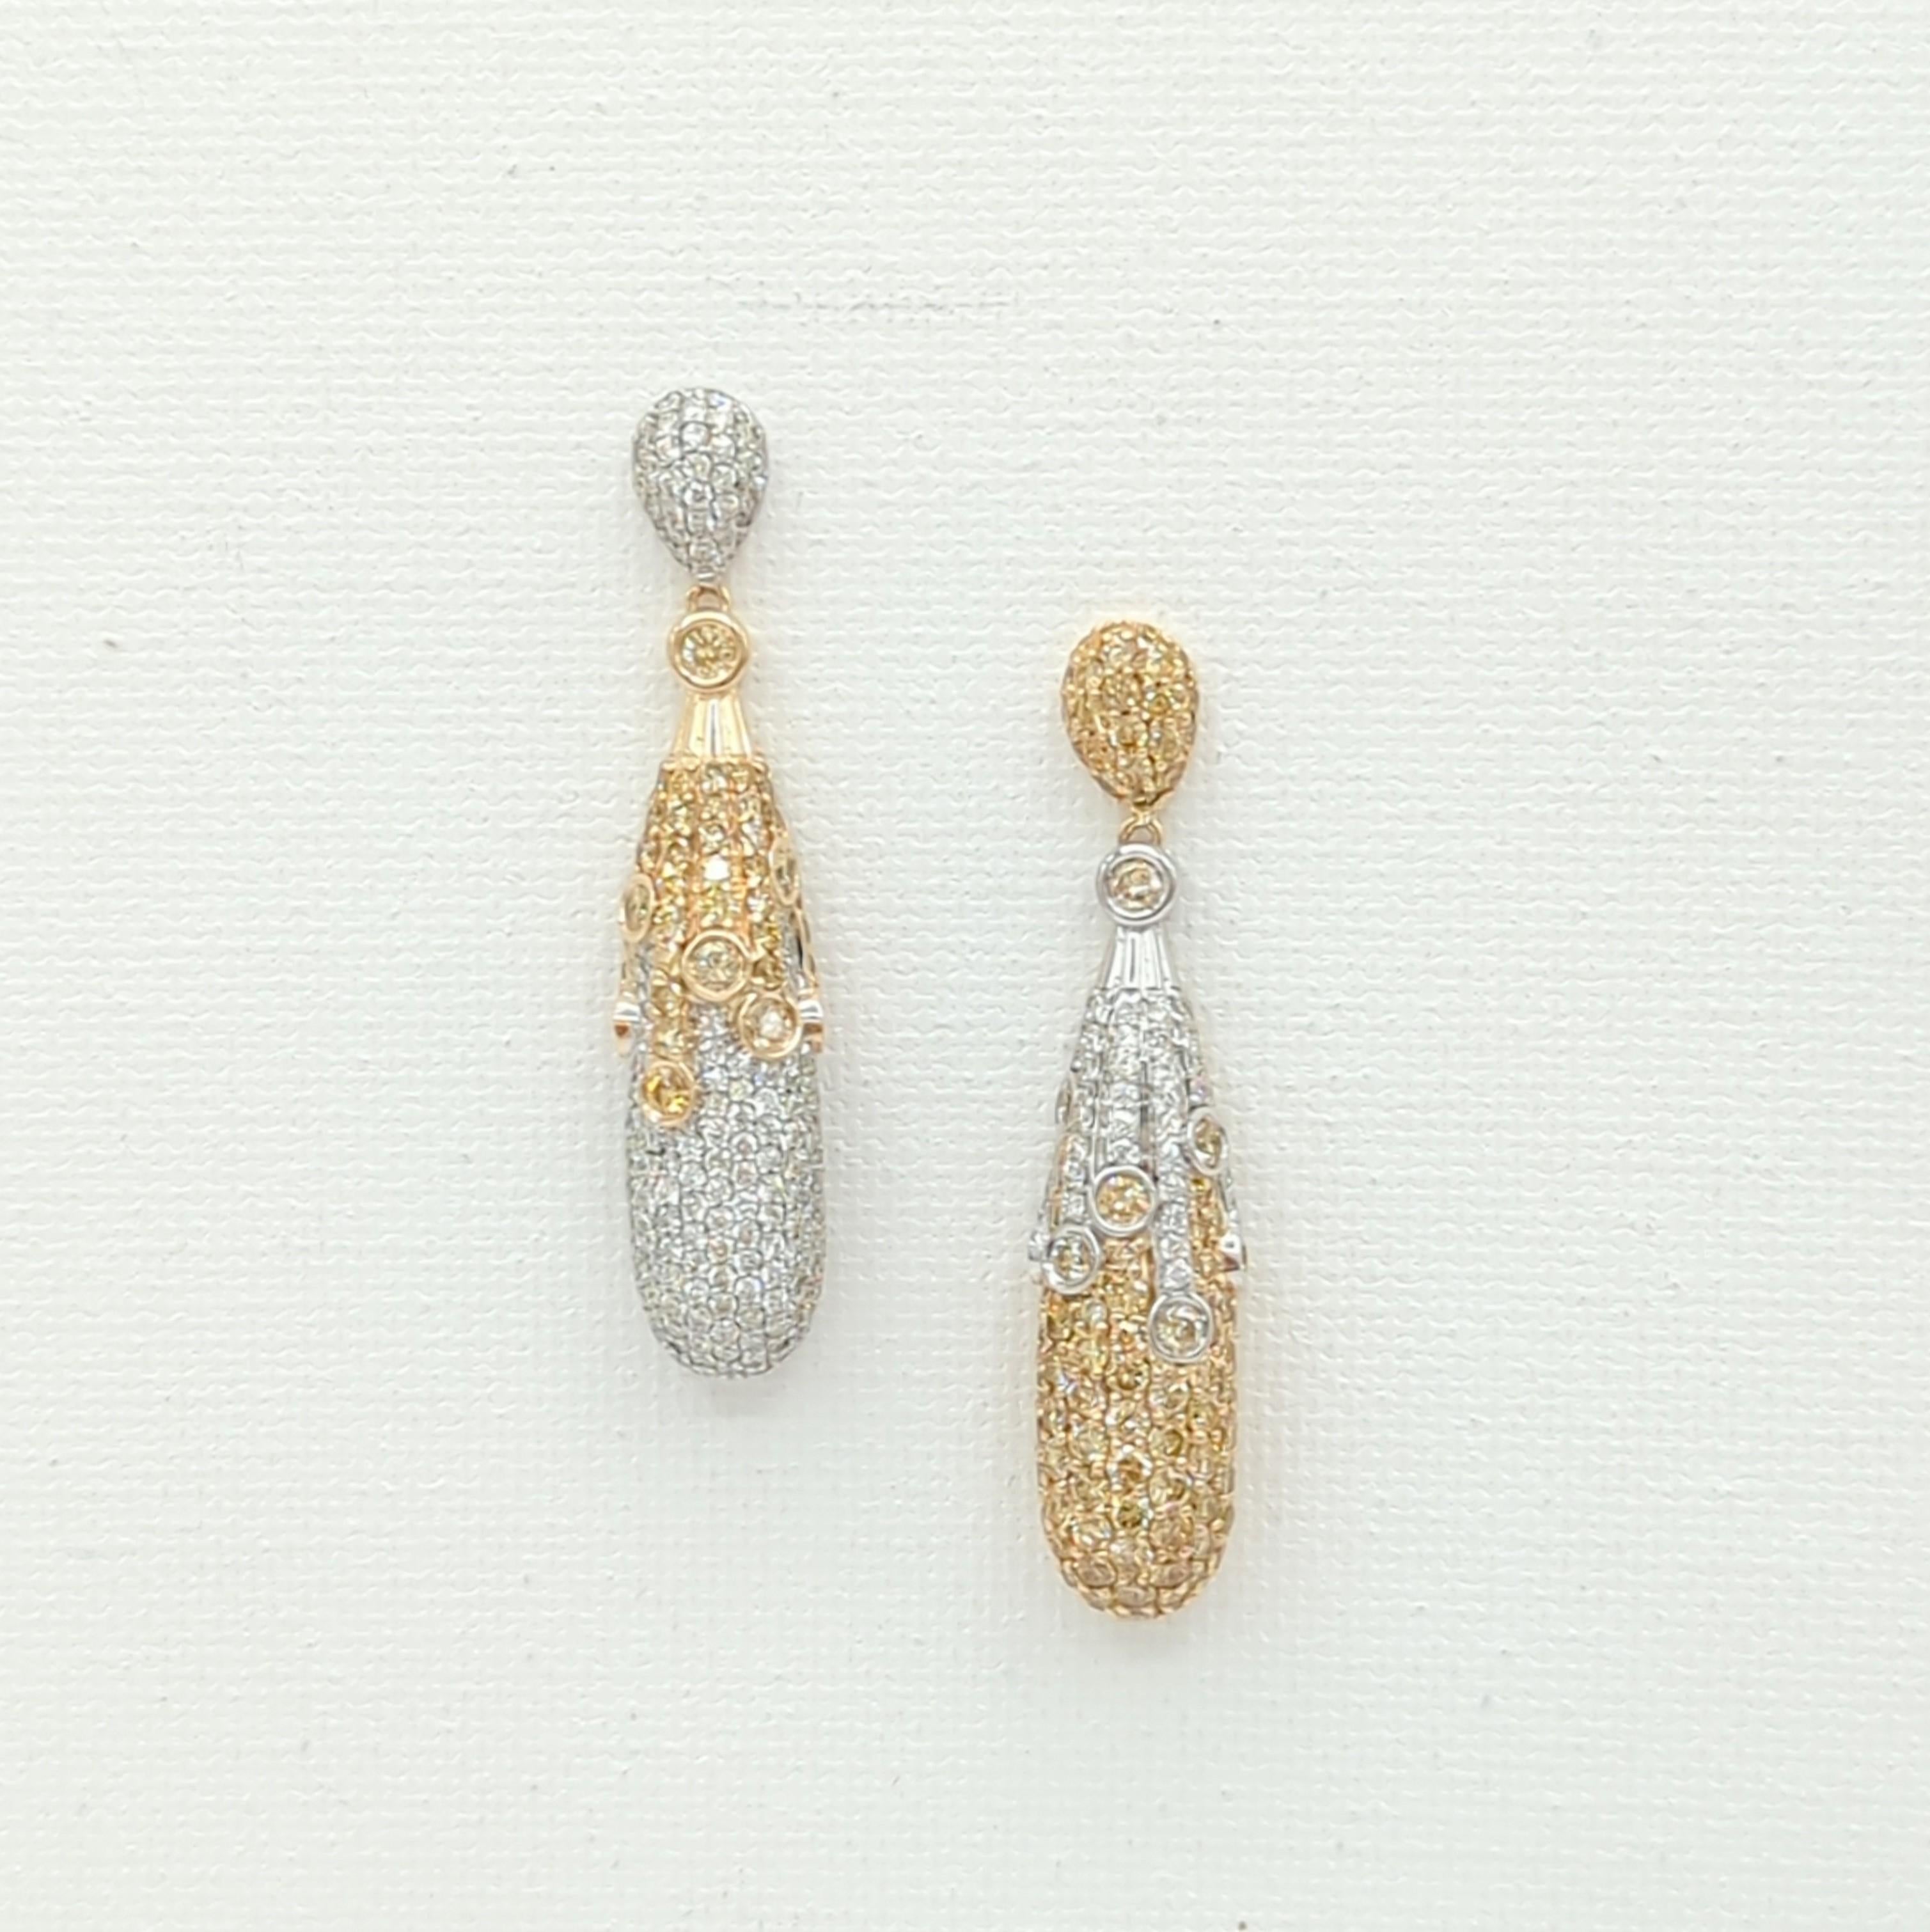 Yellow and White Diamond Dangle Earrings in 14K 2 Tone Gold For Sale 2